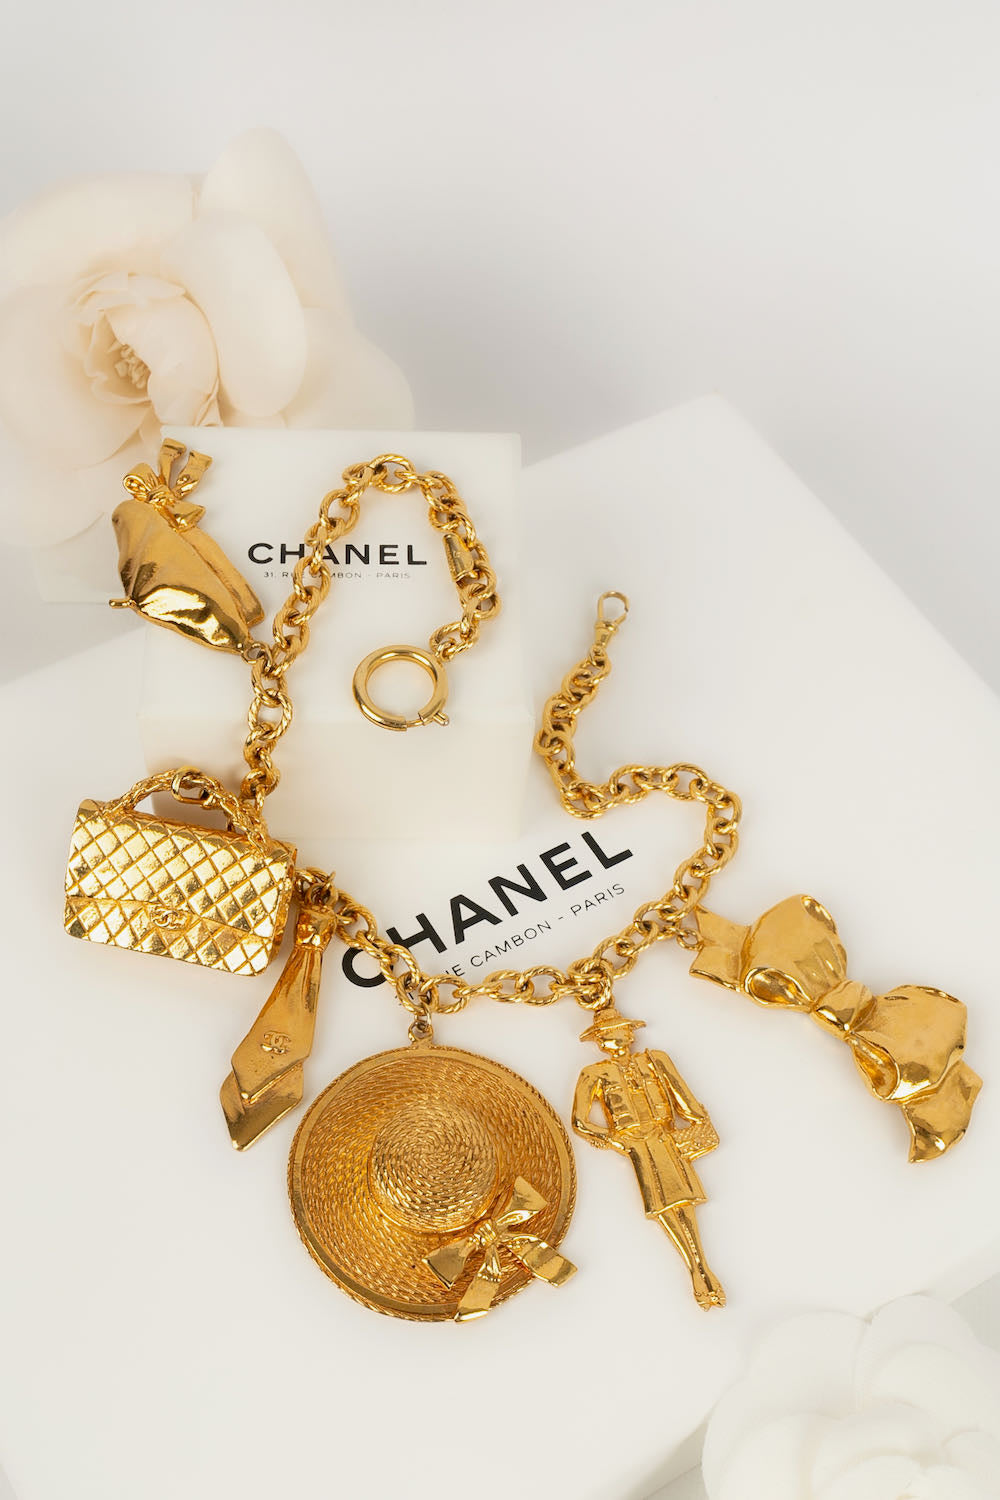 Chanel charm necklace